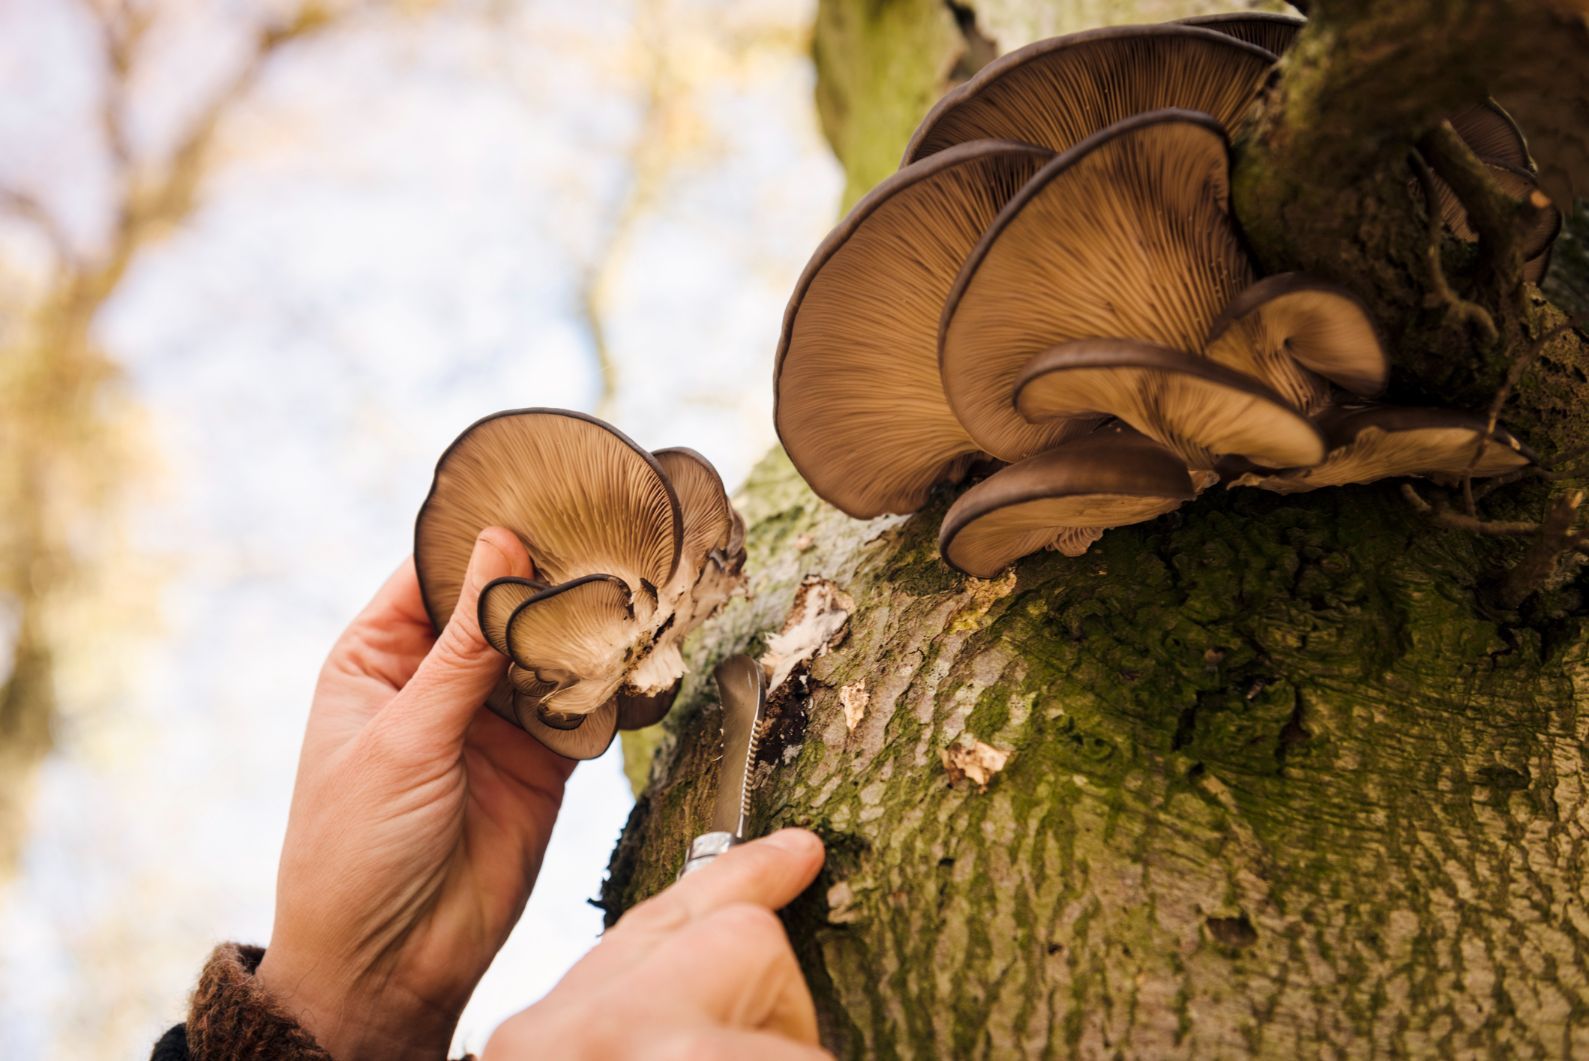 A pearl oyster mushroom being cut off of a tree trunk in Denmark